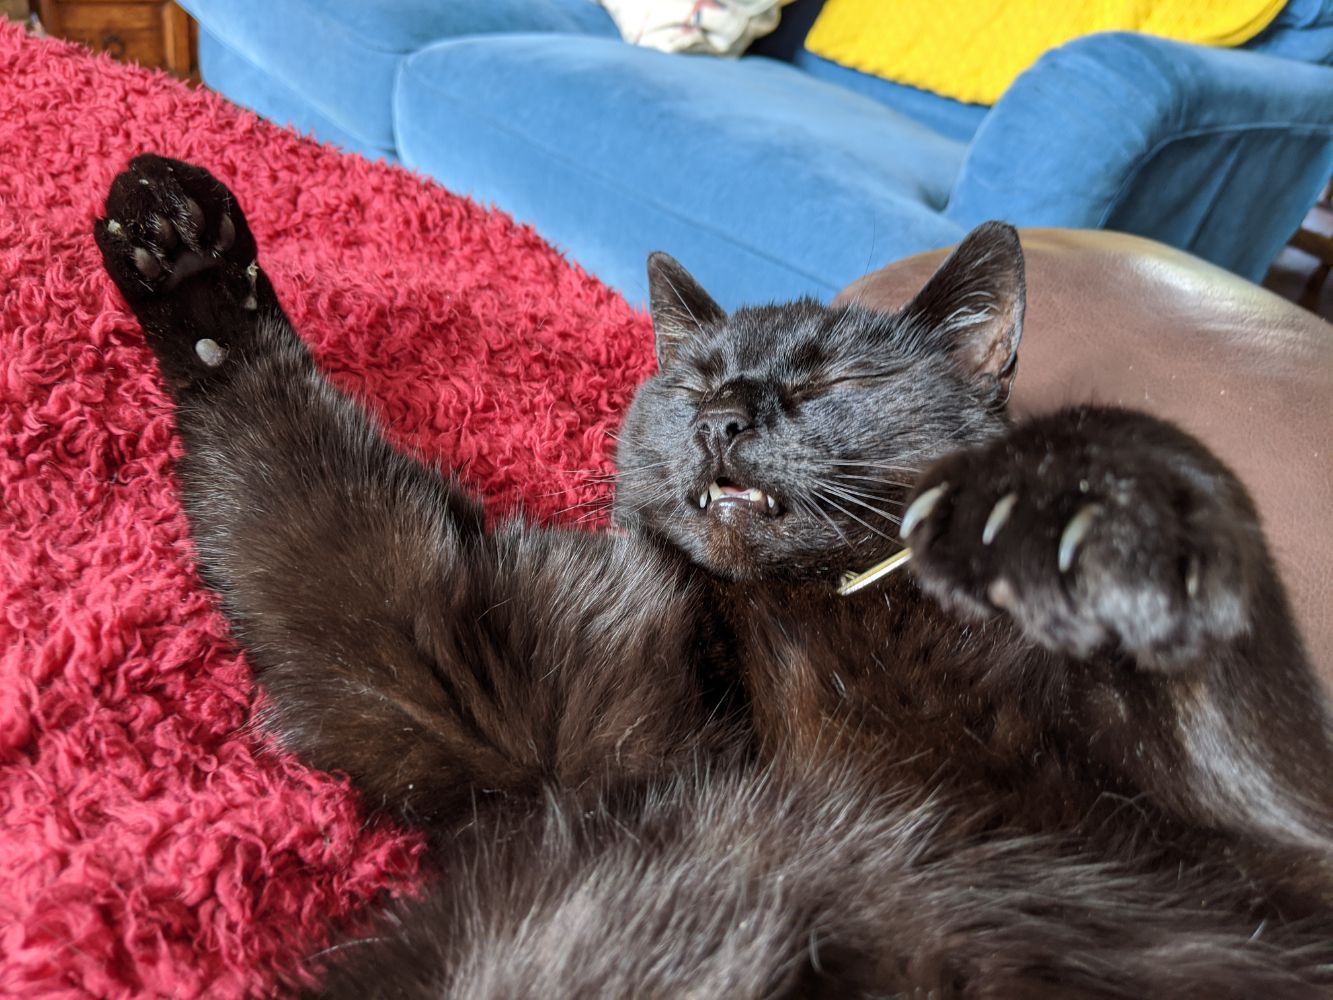 Black cat with mouth slightly open, arms raised in an odd pose, looking sleepy